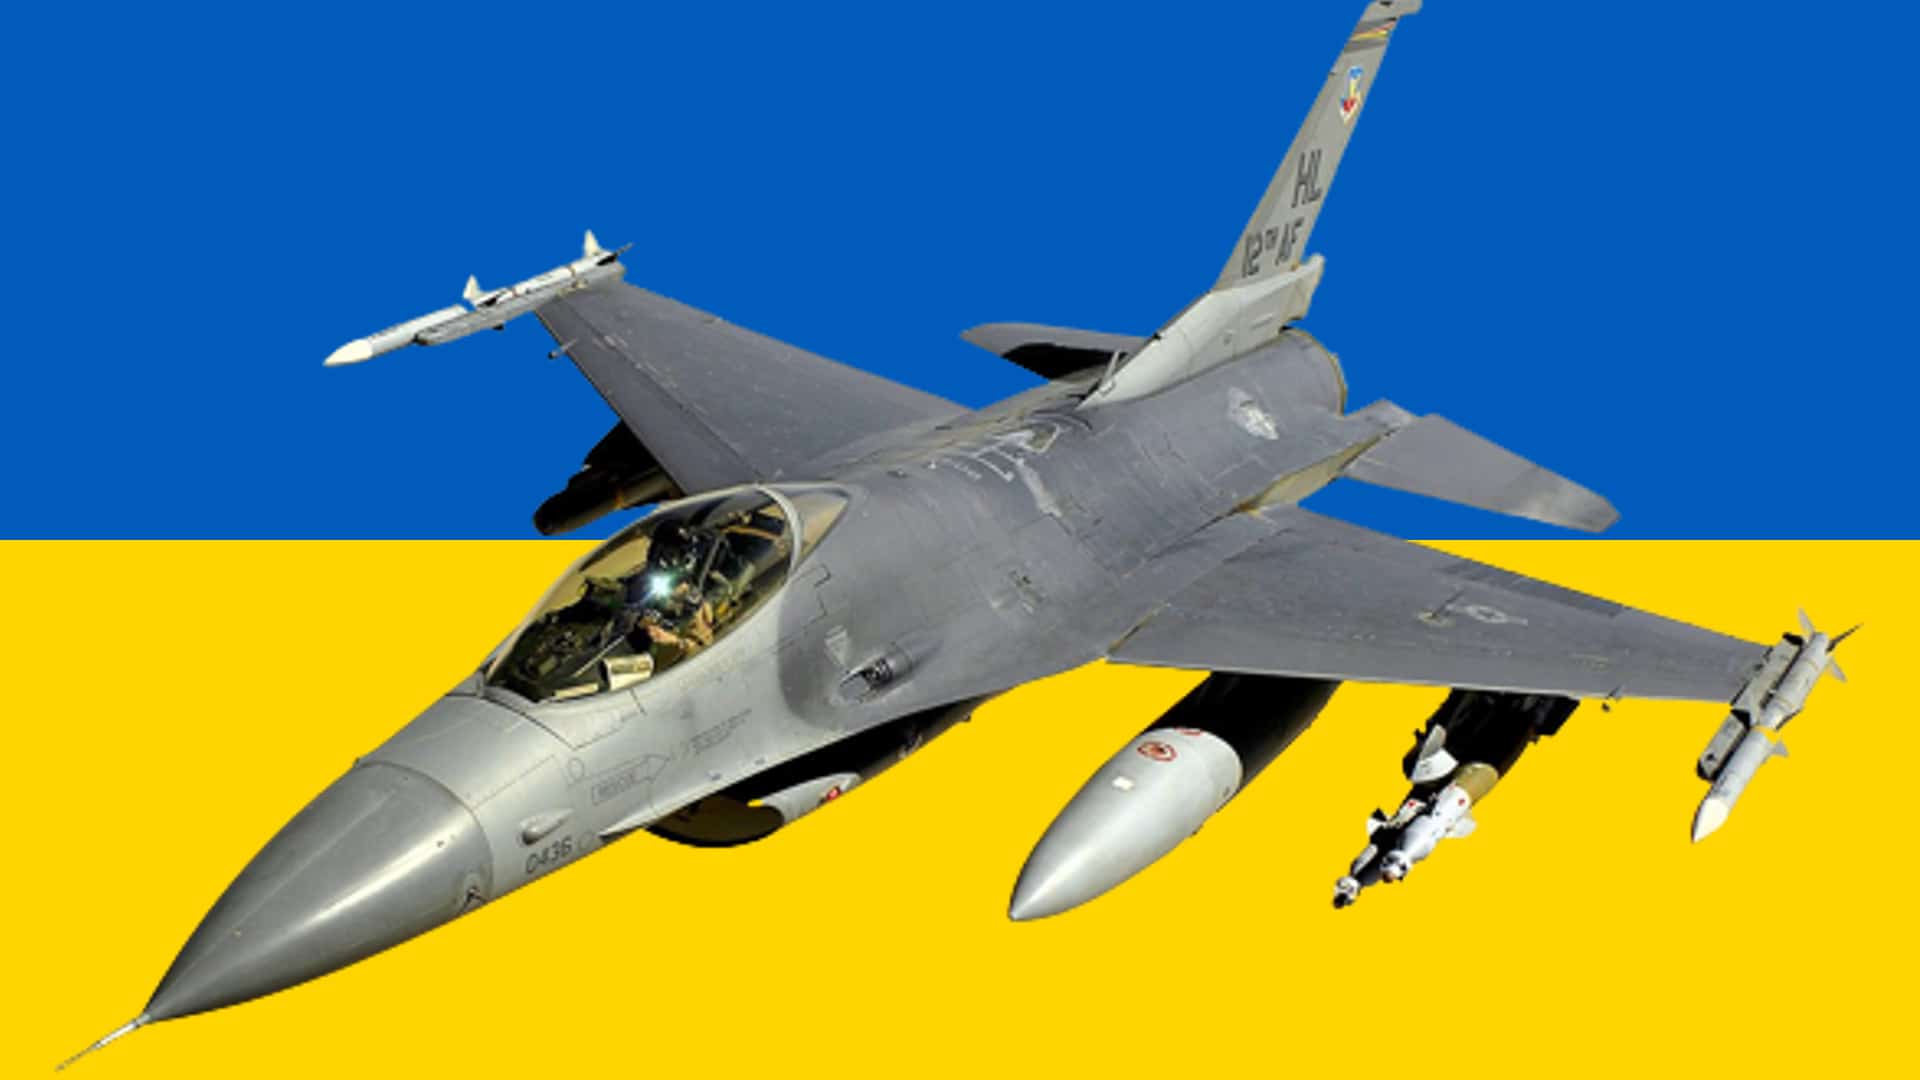 The delivery of the F-16s to Ukraine is delayed by another six months